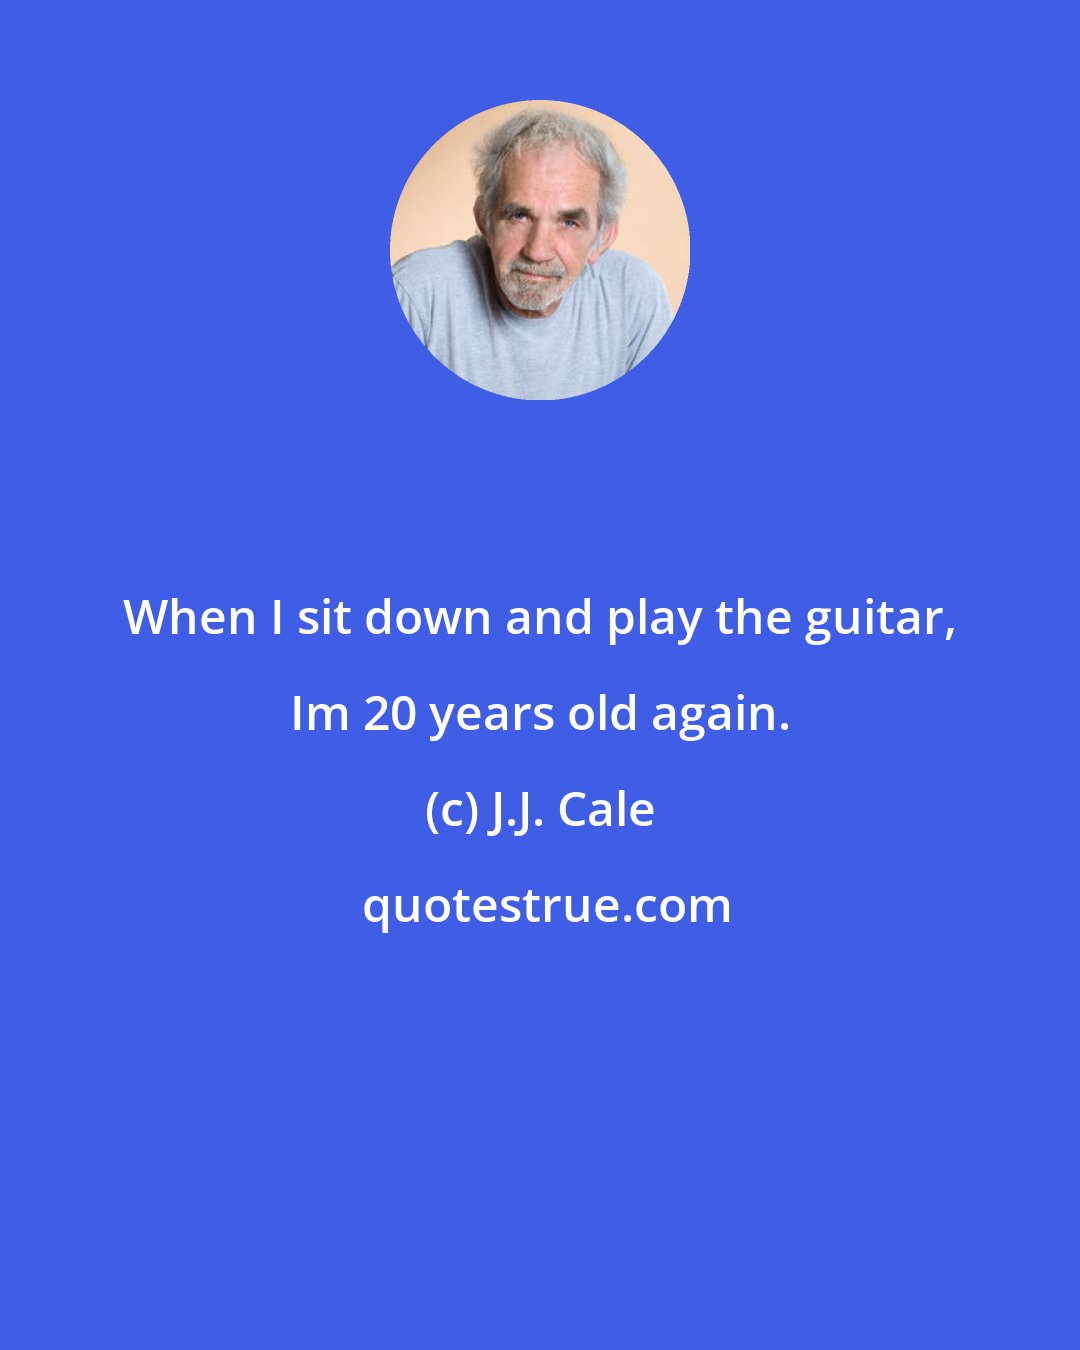 J.J. Cale: When I sit down and play the guitar, Im 20 years old again.